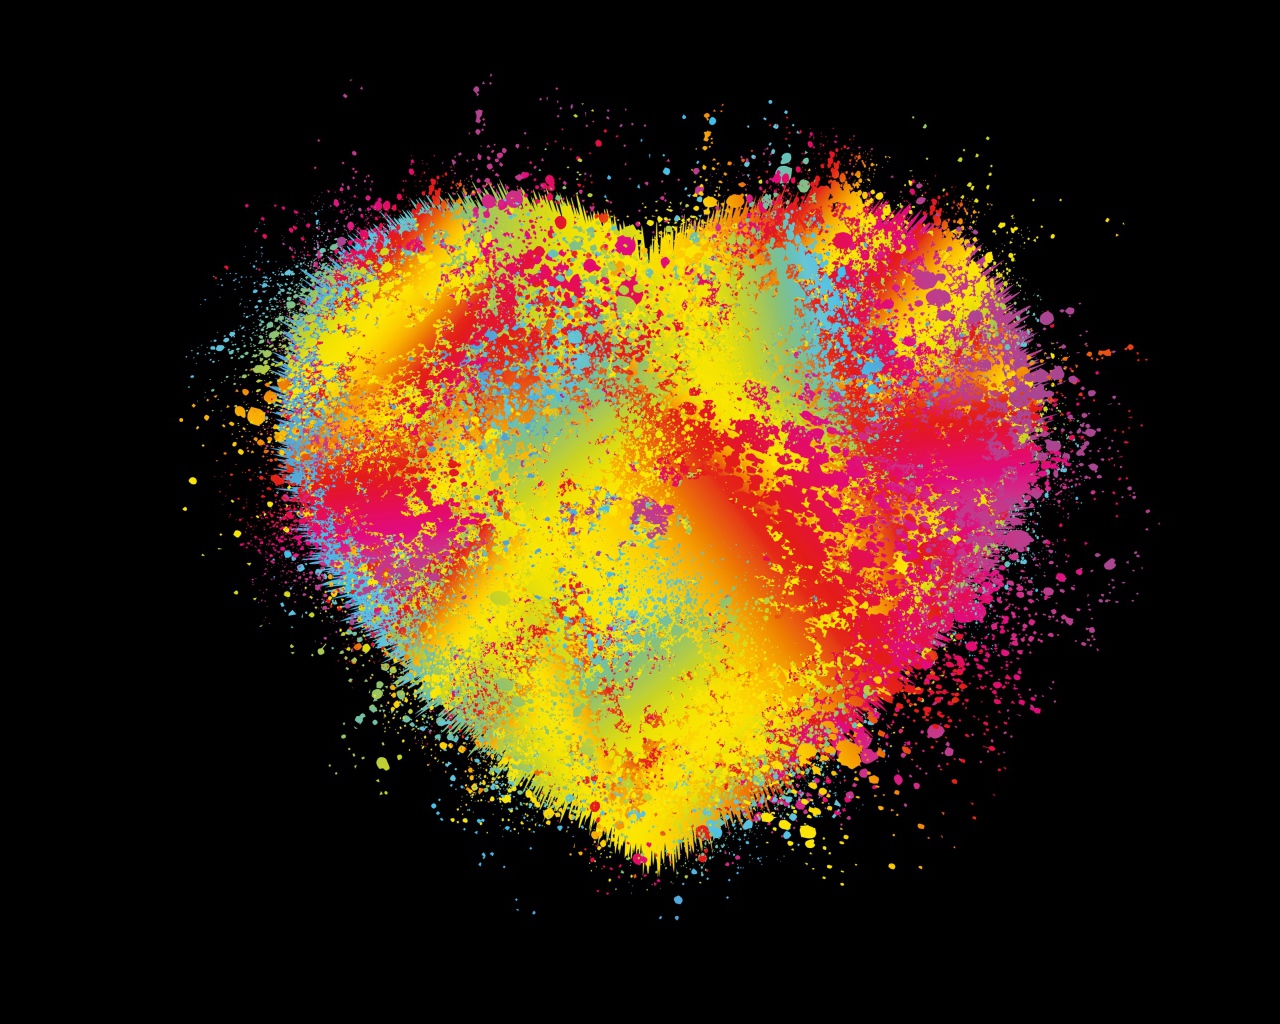 Colorful multicolored heart on black background